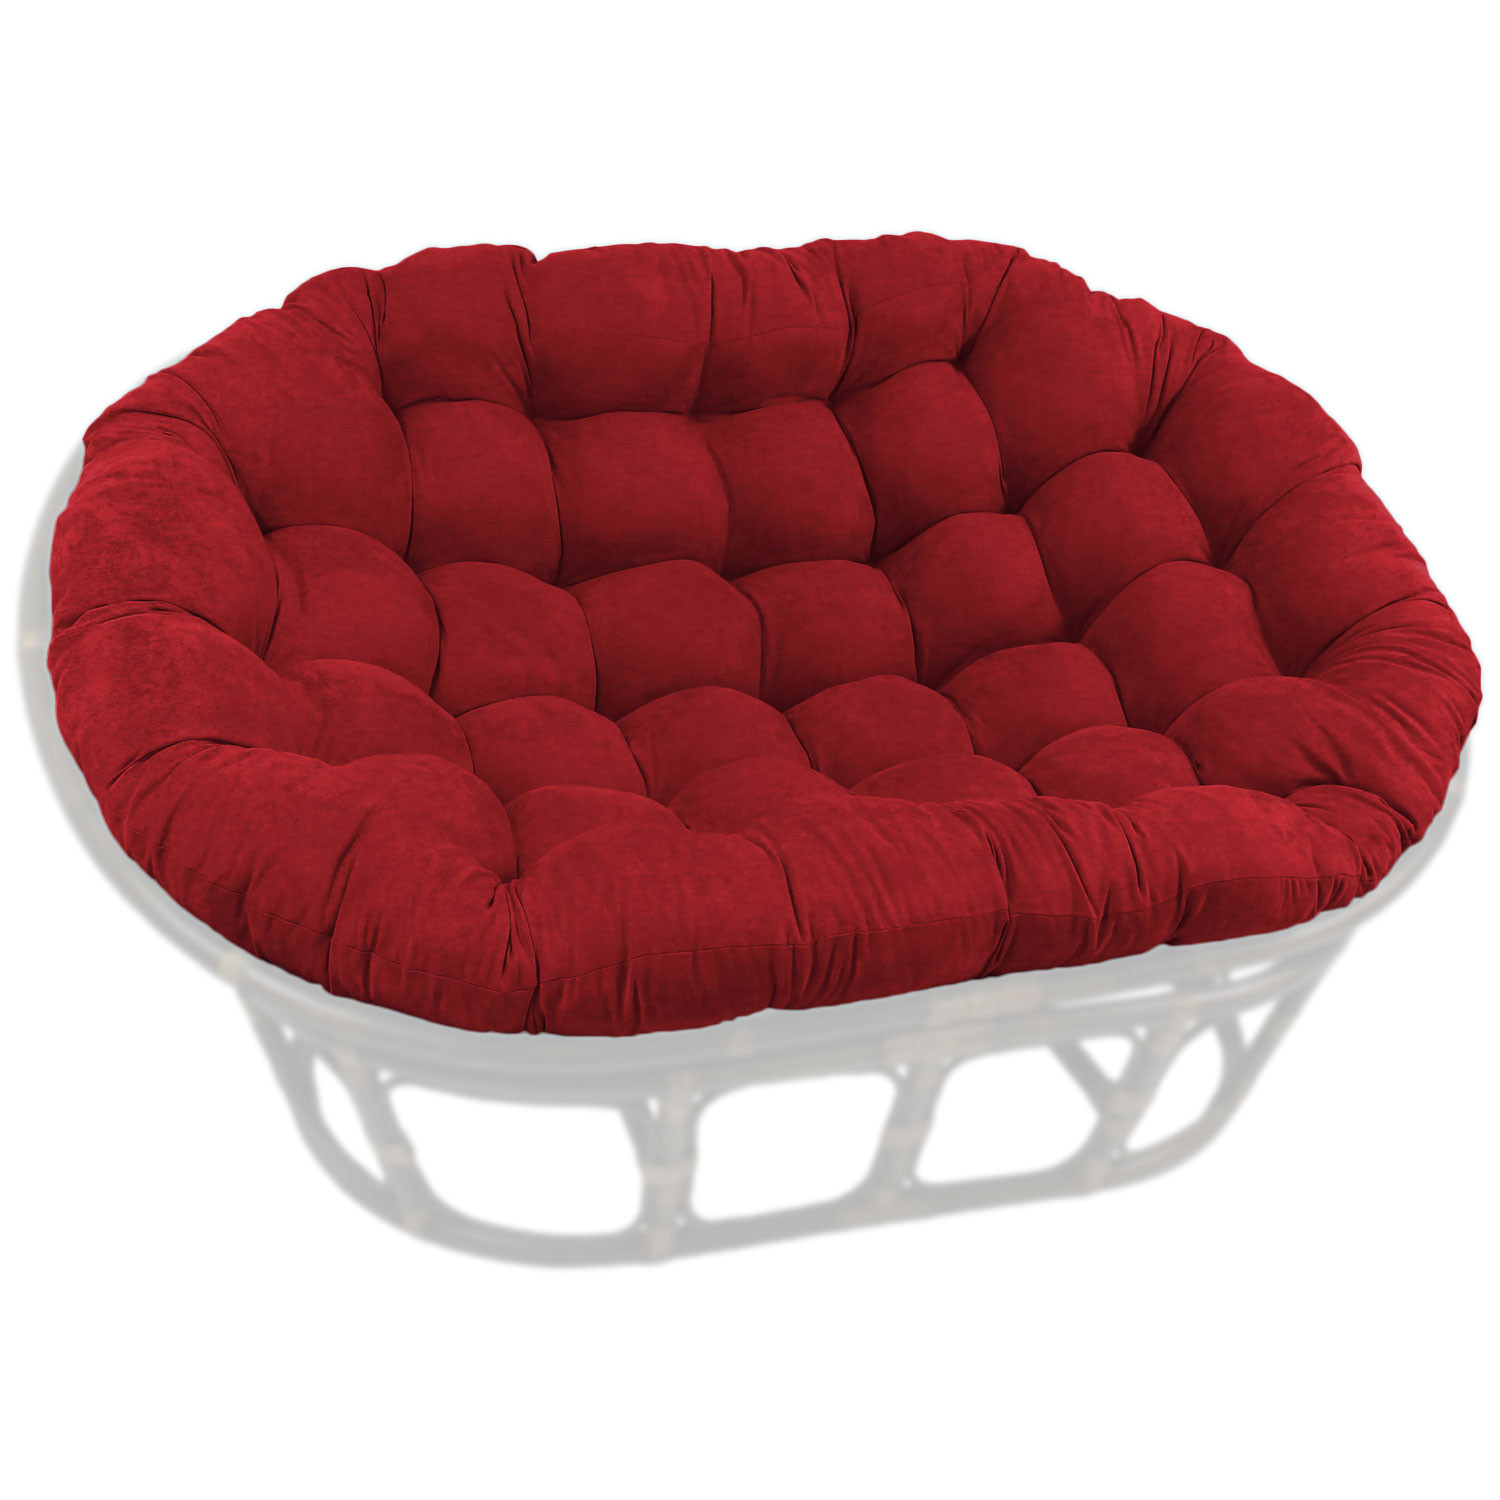 78 x 58 oversized double papasan cushion tufted microsuede chair outdoor d